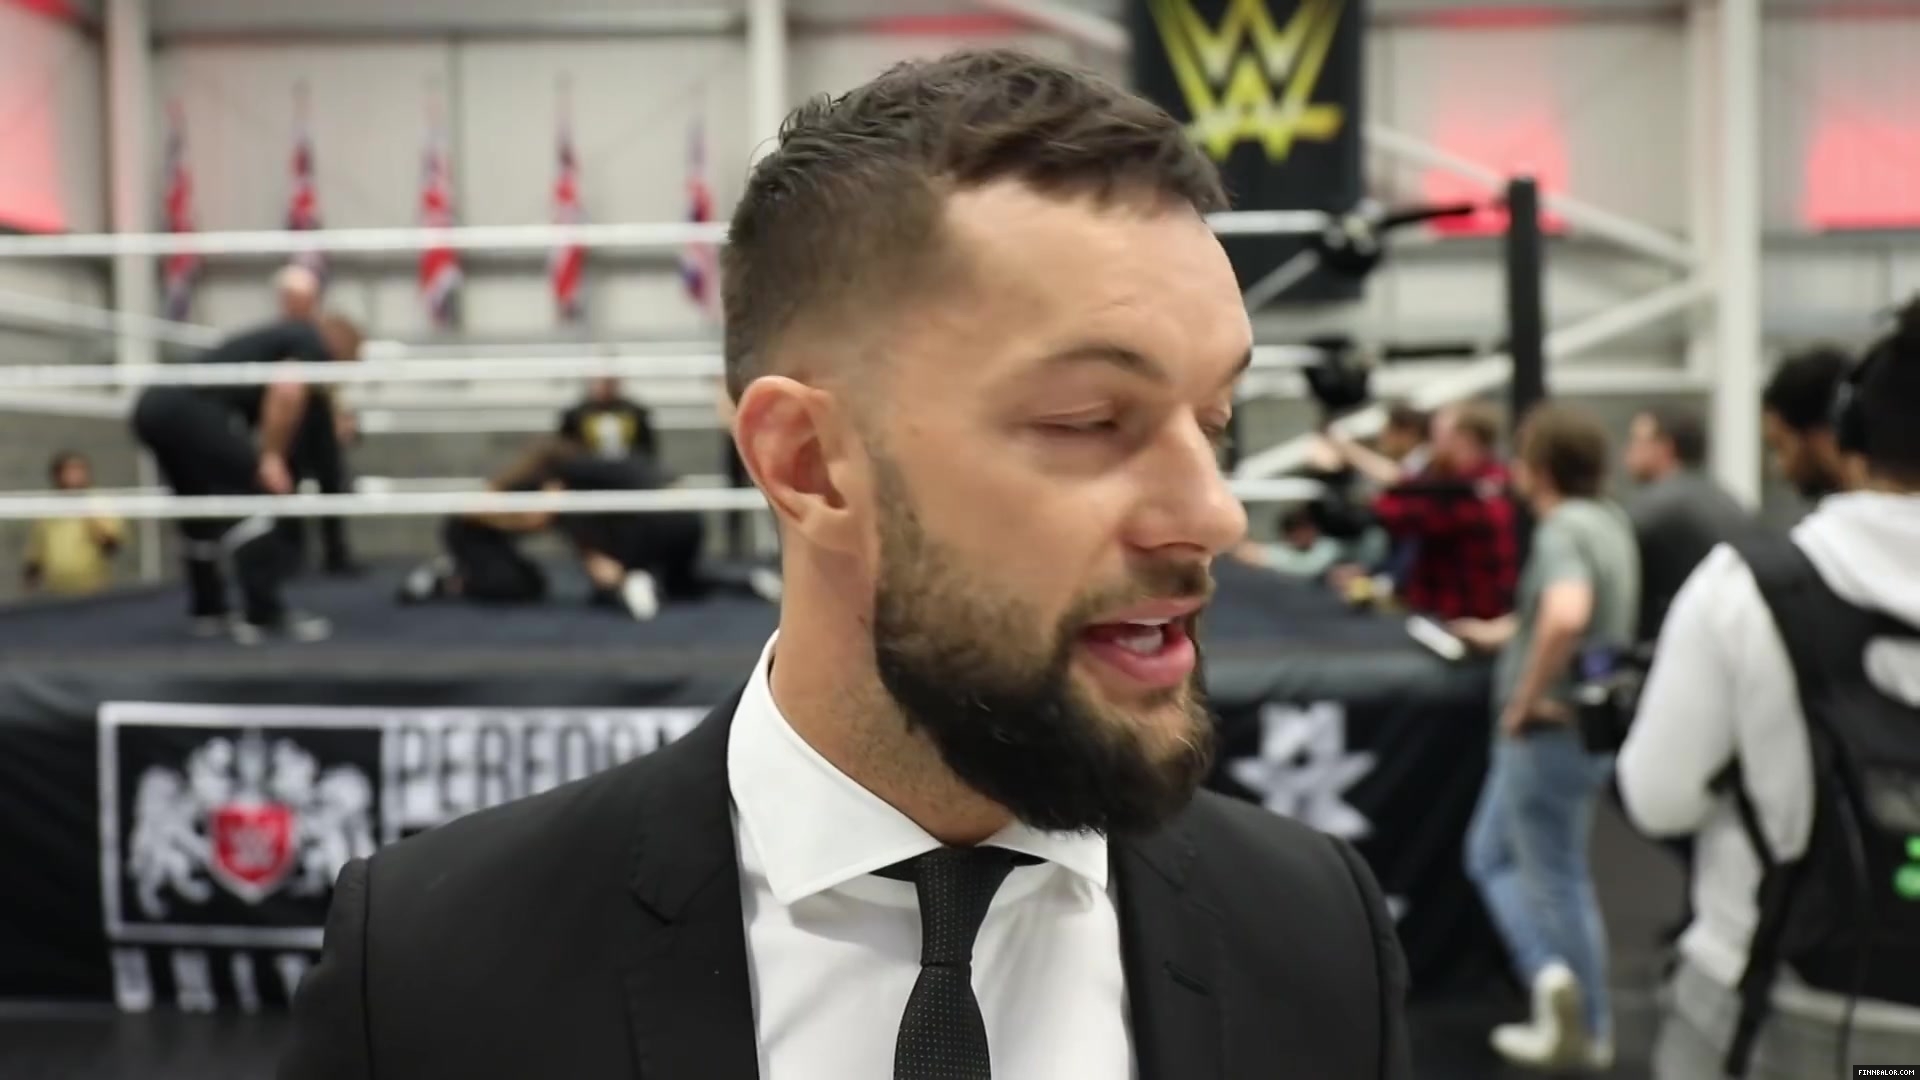 WWE_Superstar_FINN_BALOR_joins_MOUSTACHE_MOUNTAIN_at_the_opening_of_the_NXT_UK_PC_140.jpg